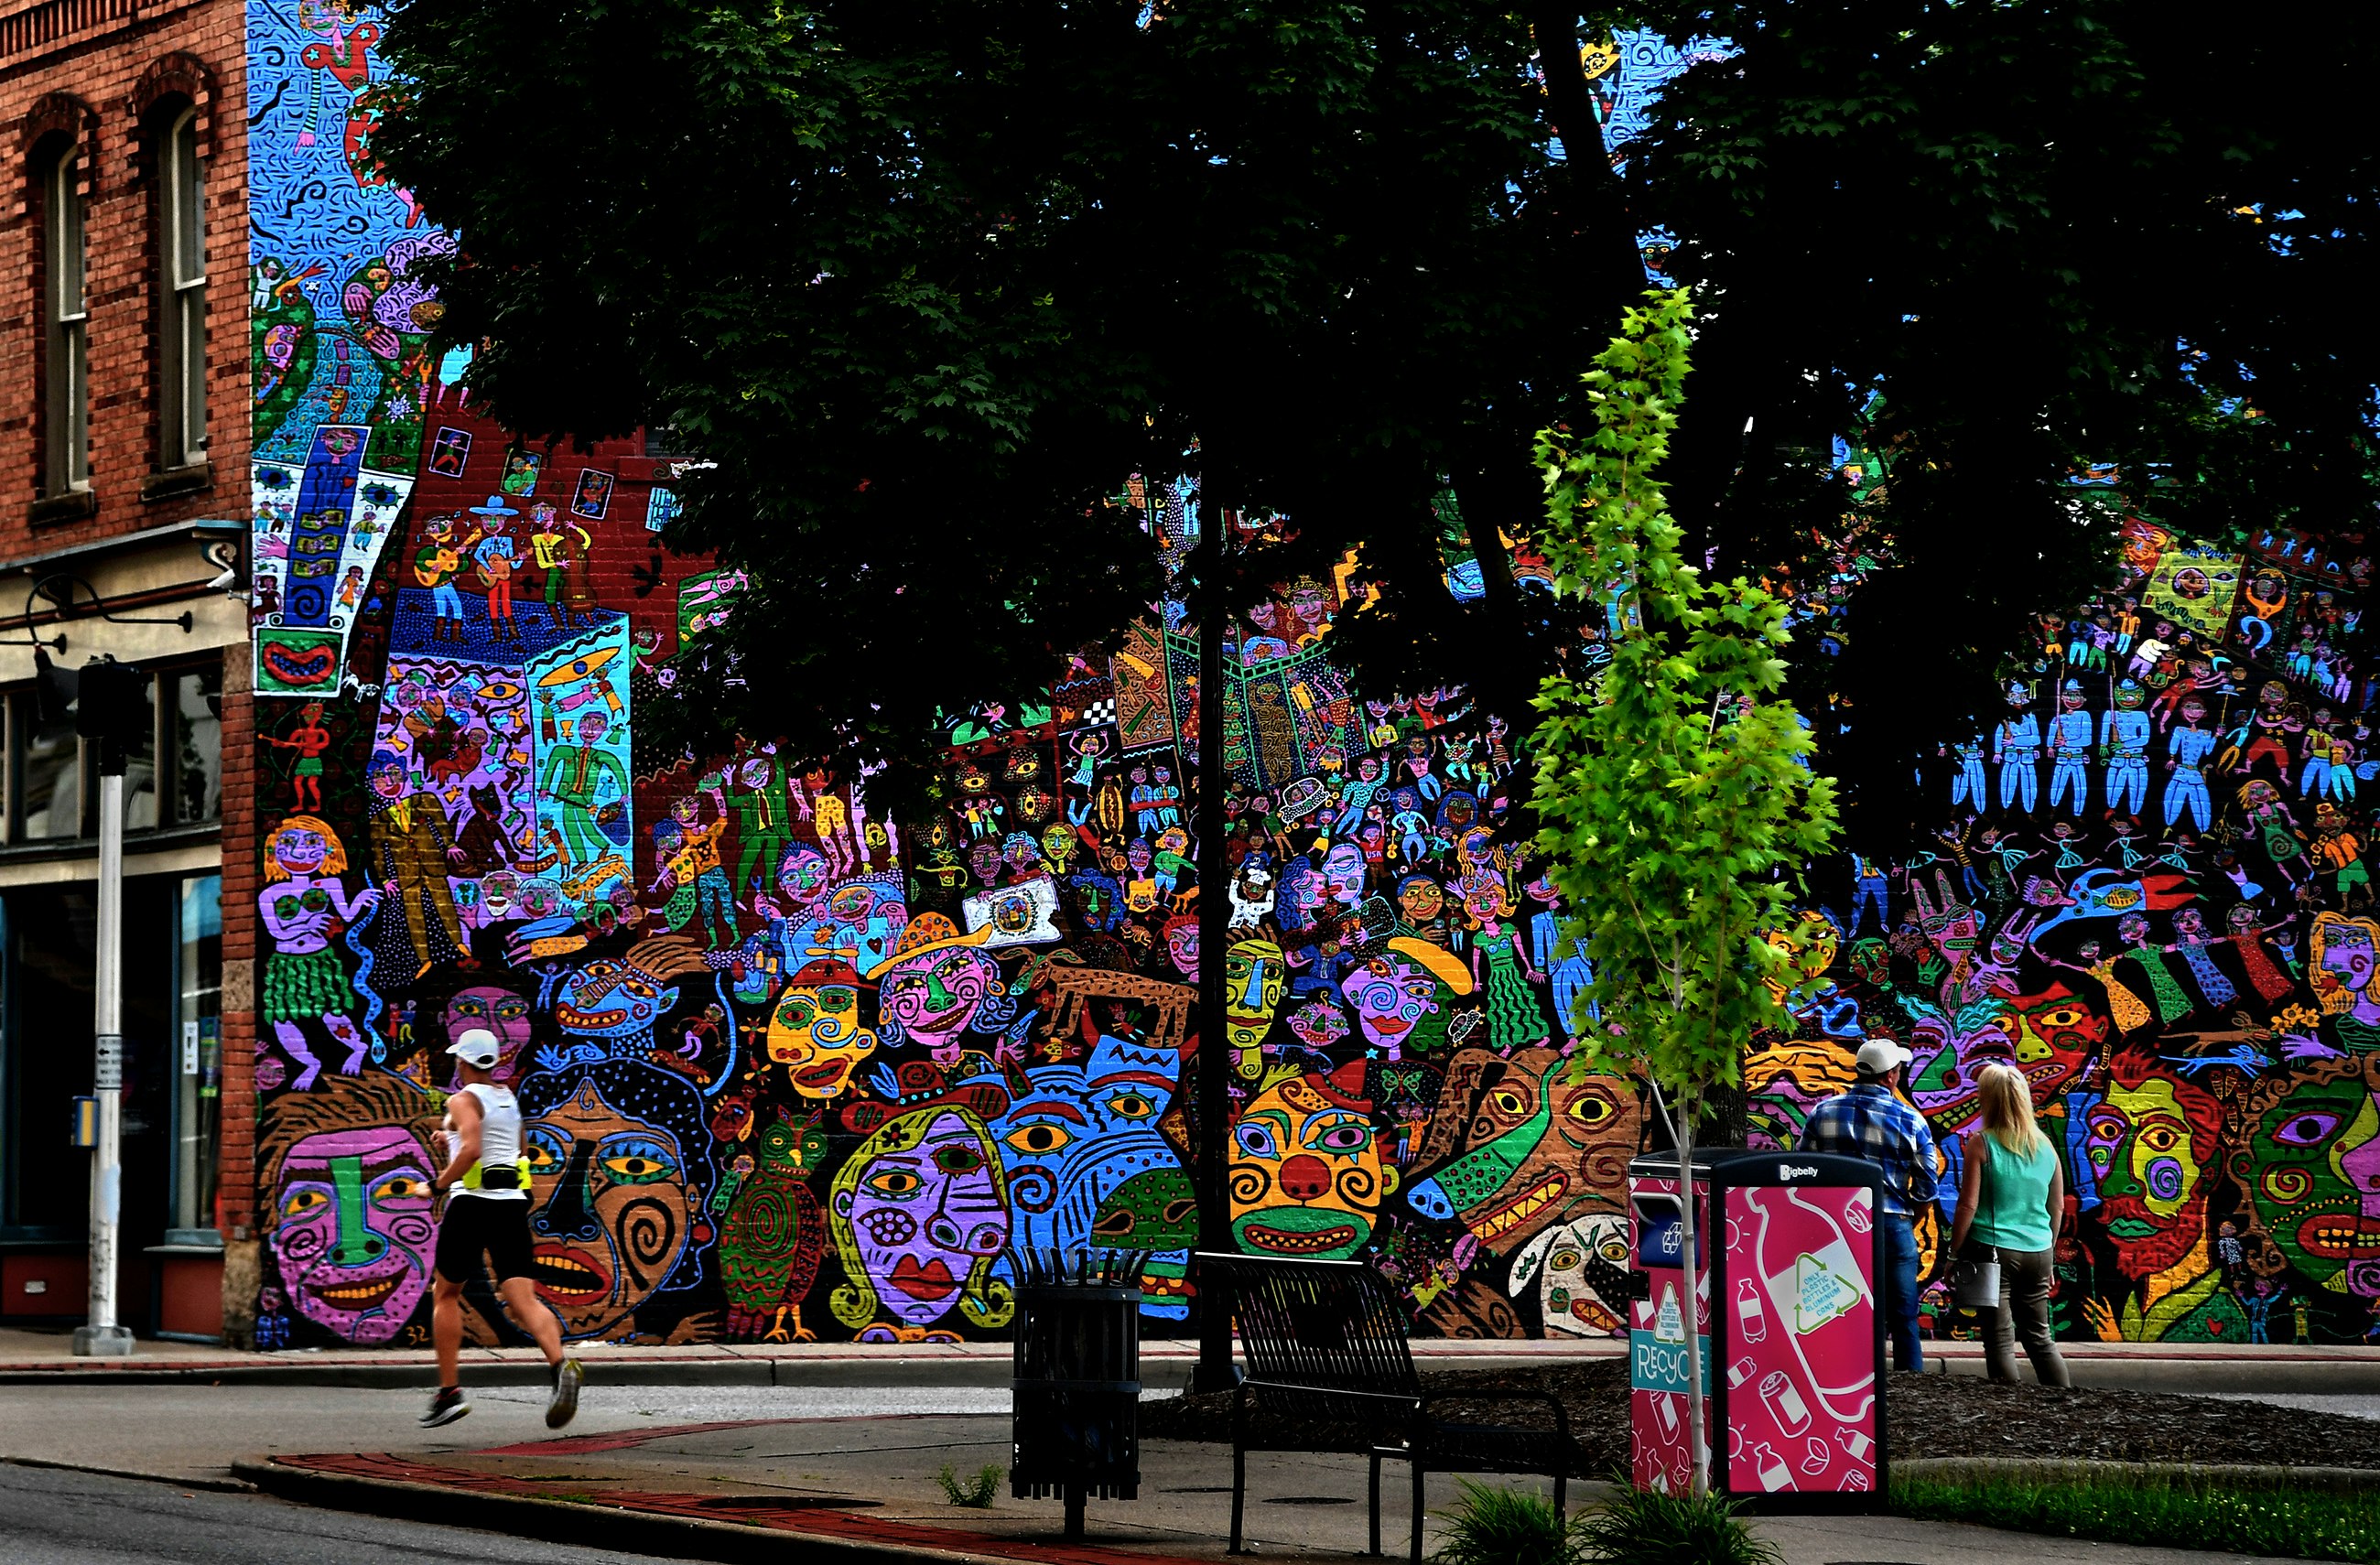 A colorful mural showing abstract faces adorns the side of a historic brick building, partially obscured by trees. A man and a woman stand and admire the mural while a jogger runs by. A trashcan and park bench are in the foreground